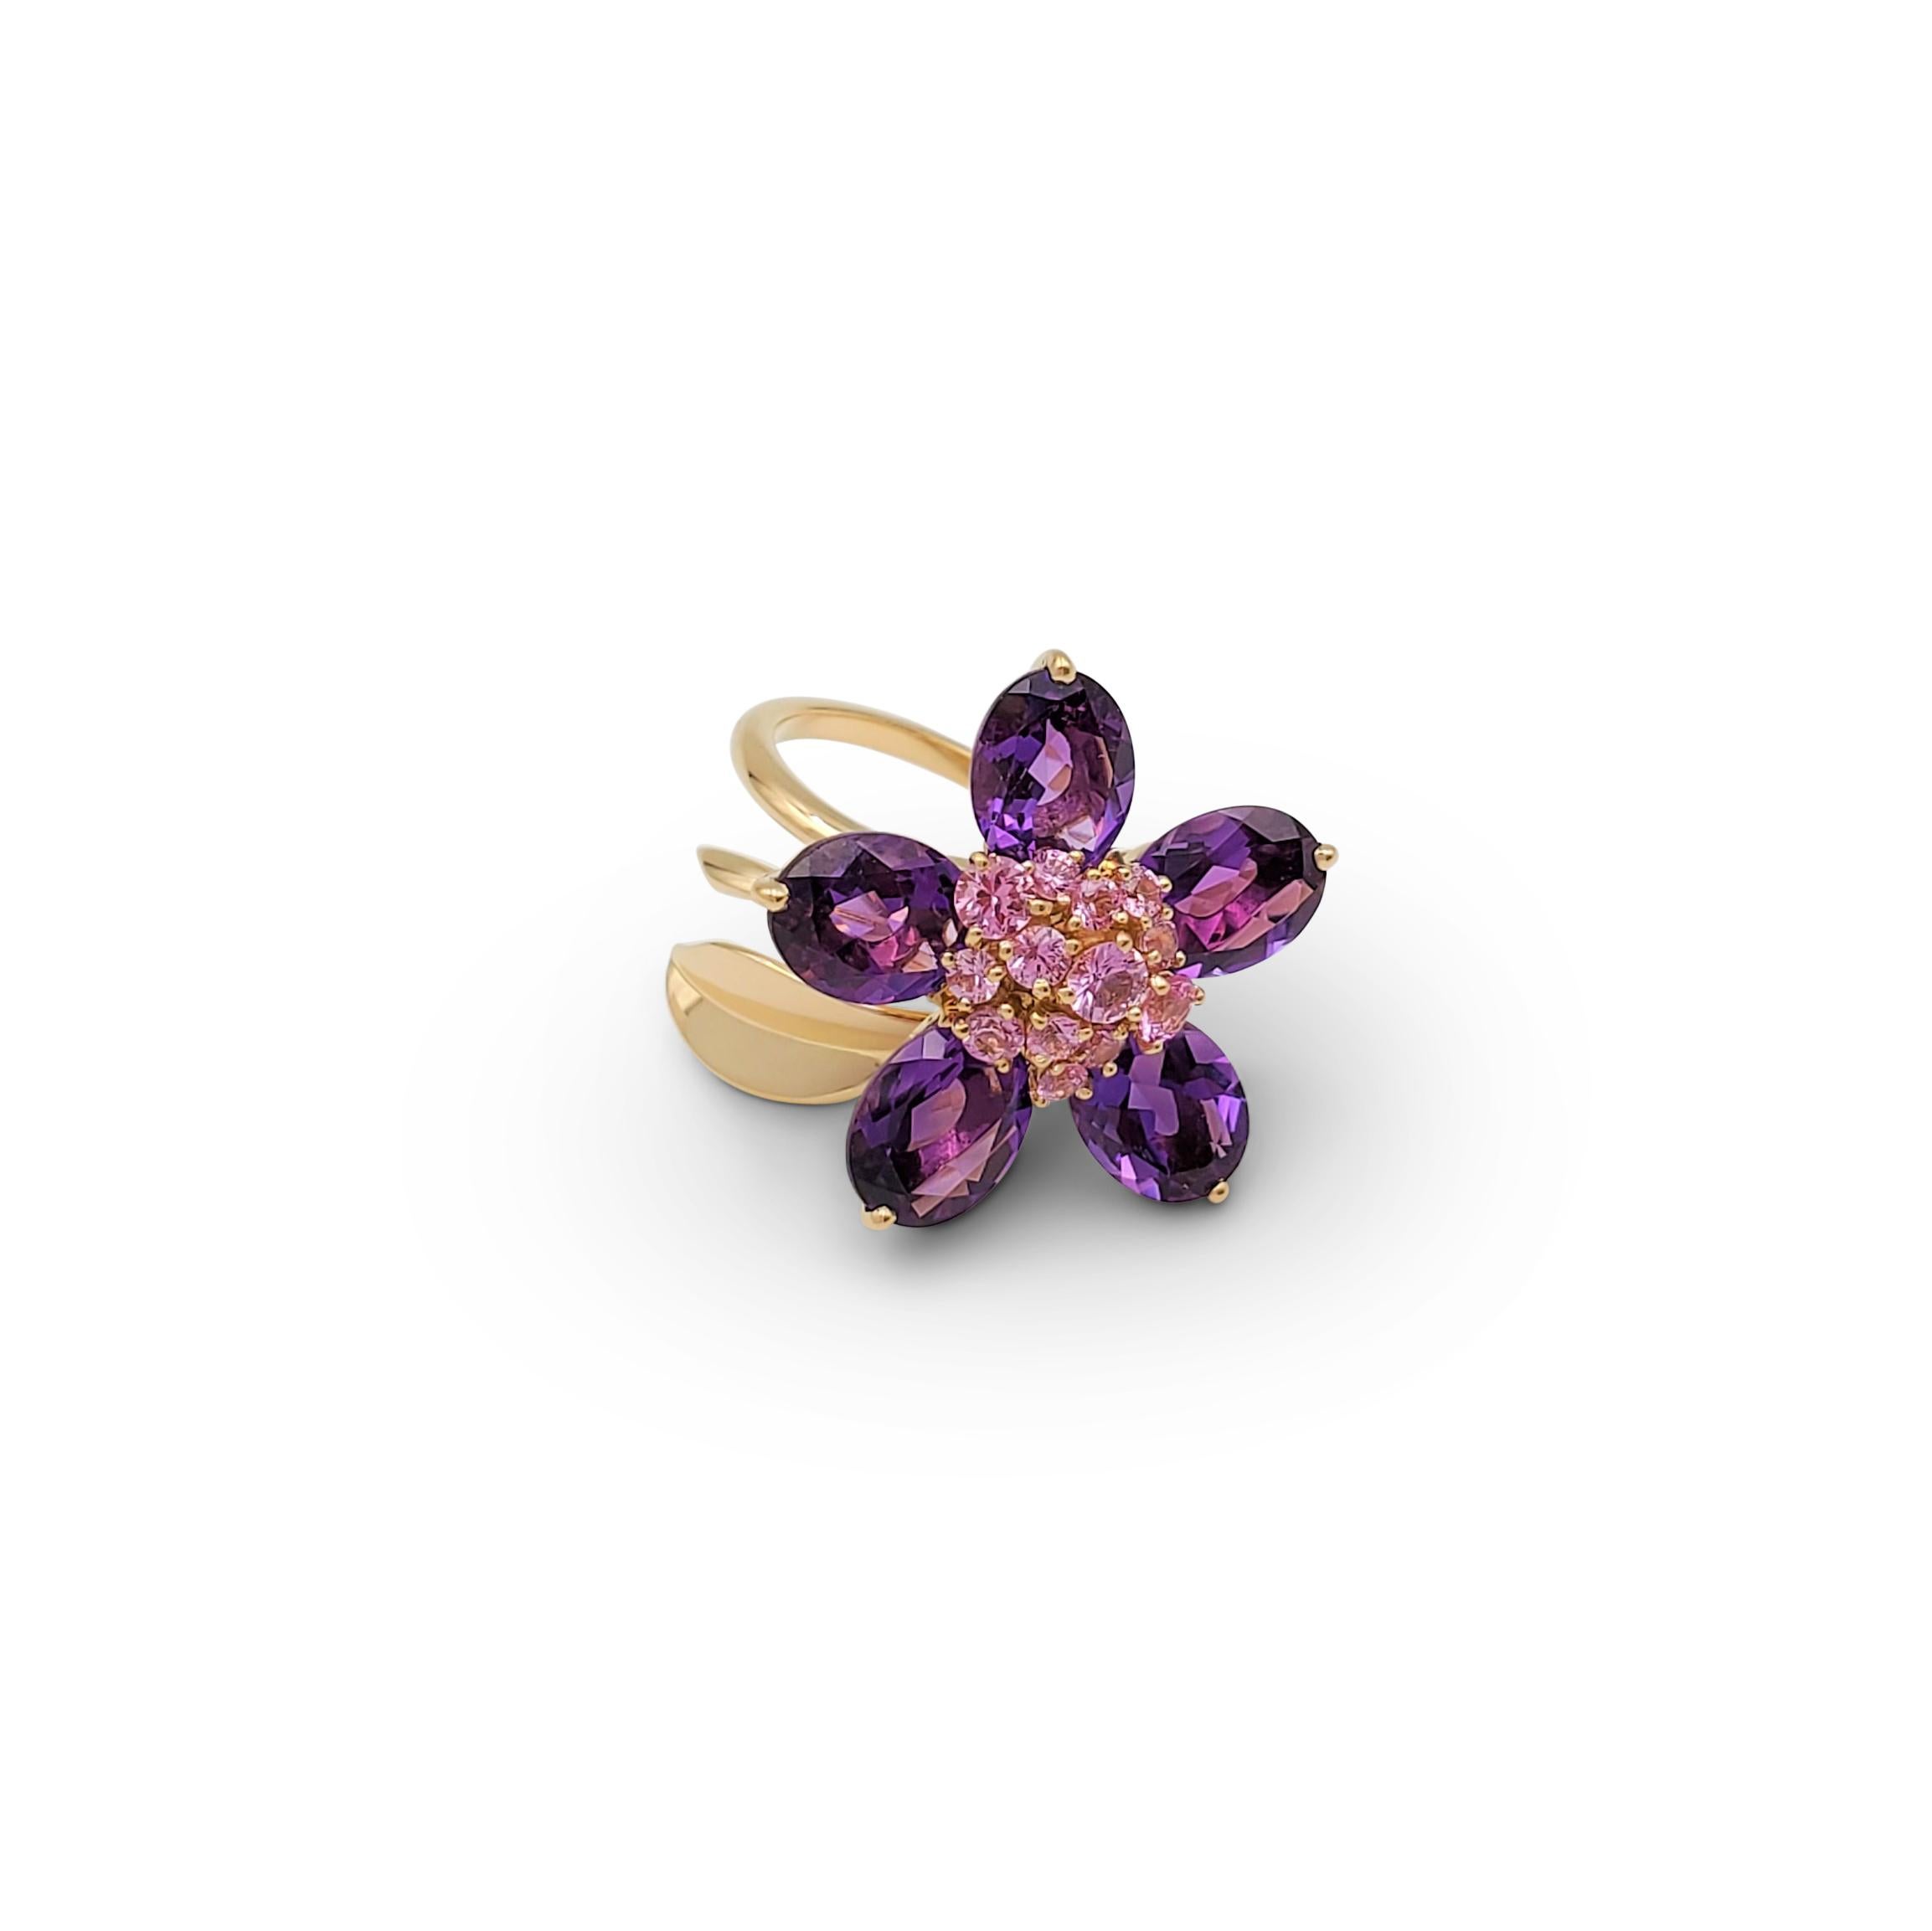 Authentic vibrant Van Cleef & Arpels ring from the 'Hawaii' collection. Designed as a rotating flower, the center is set with round graduated pink sapphires weighing an estimated 1.00 carats total. Five pear-shaped amethyst petals weighing an